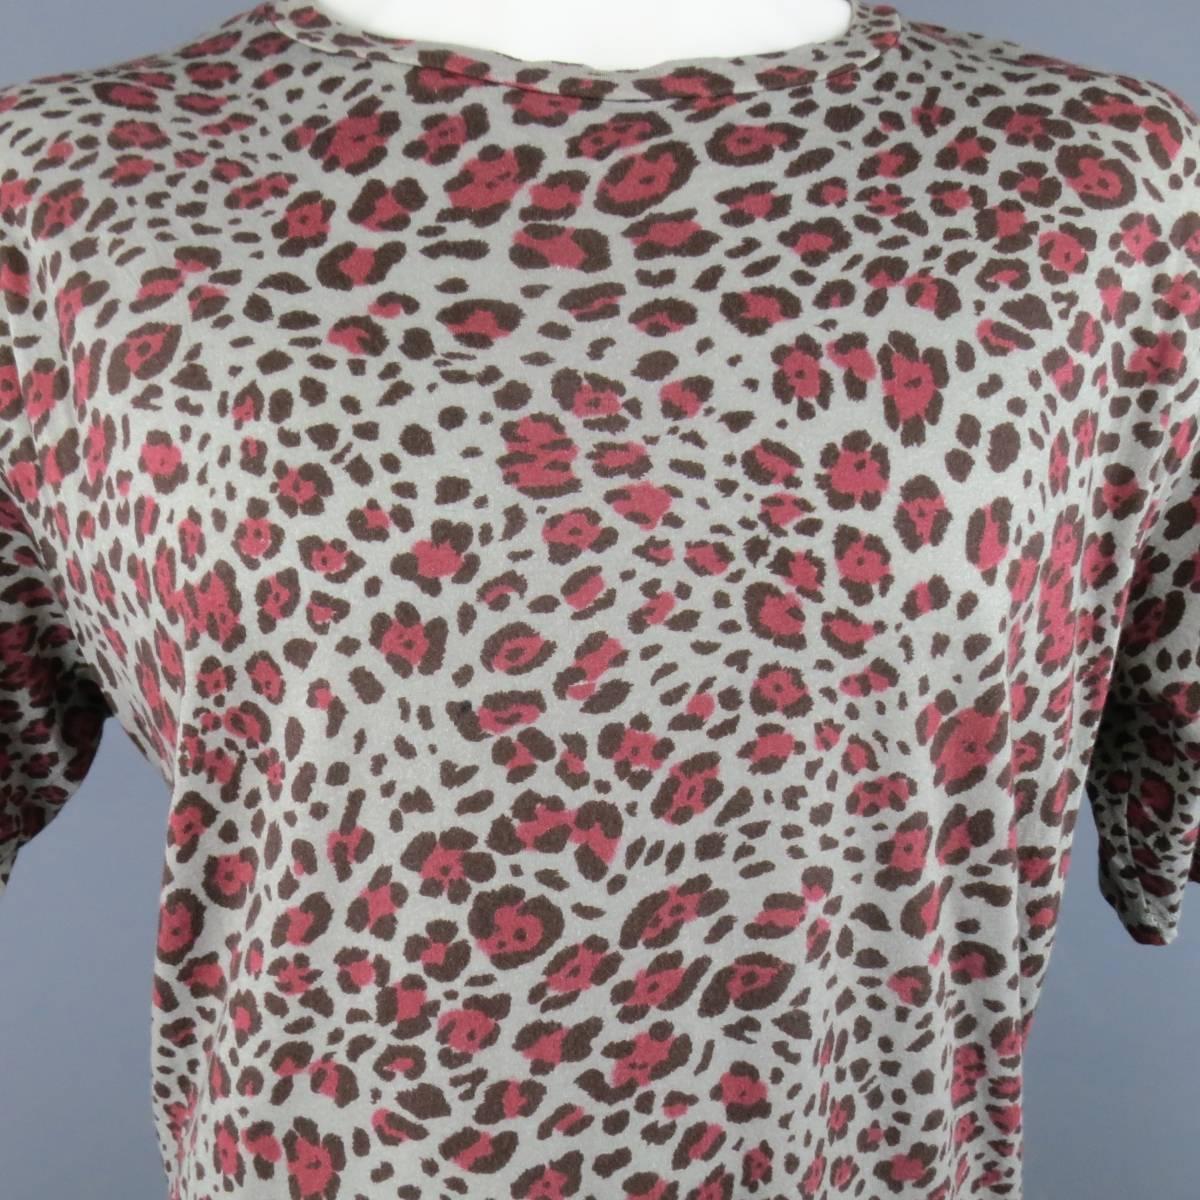 DRIES VAN NOTEN short sleeve T-shirt in a light gray soft cotton jersey with all over red cheetah leopard print featuring an oversized fit and scoop neck.
 
Excellent Pre-Owned Condition.
Marked: Large
 
Measurements:
 
Shoulder: 22 in.
Chest: 52